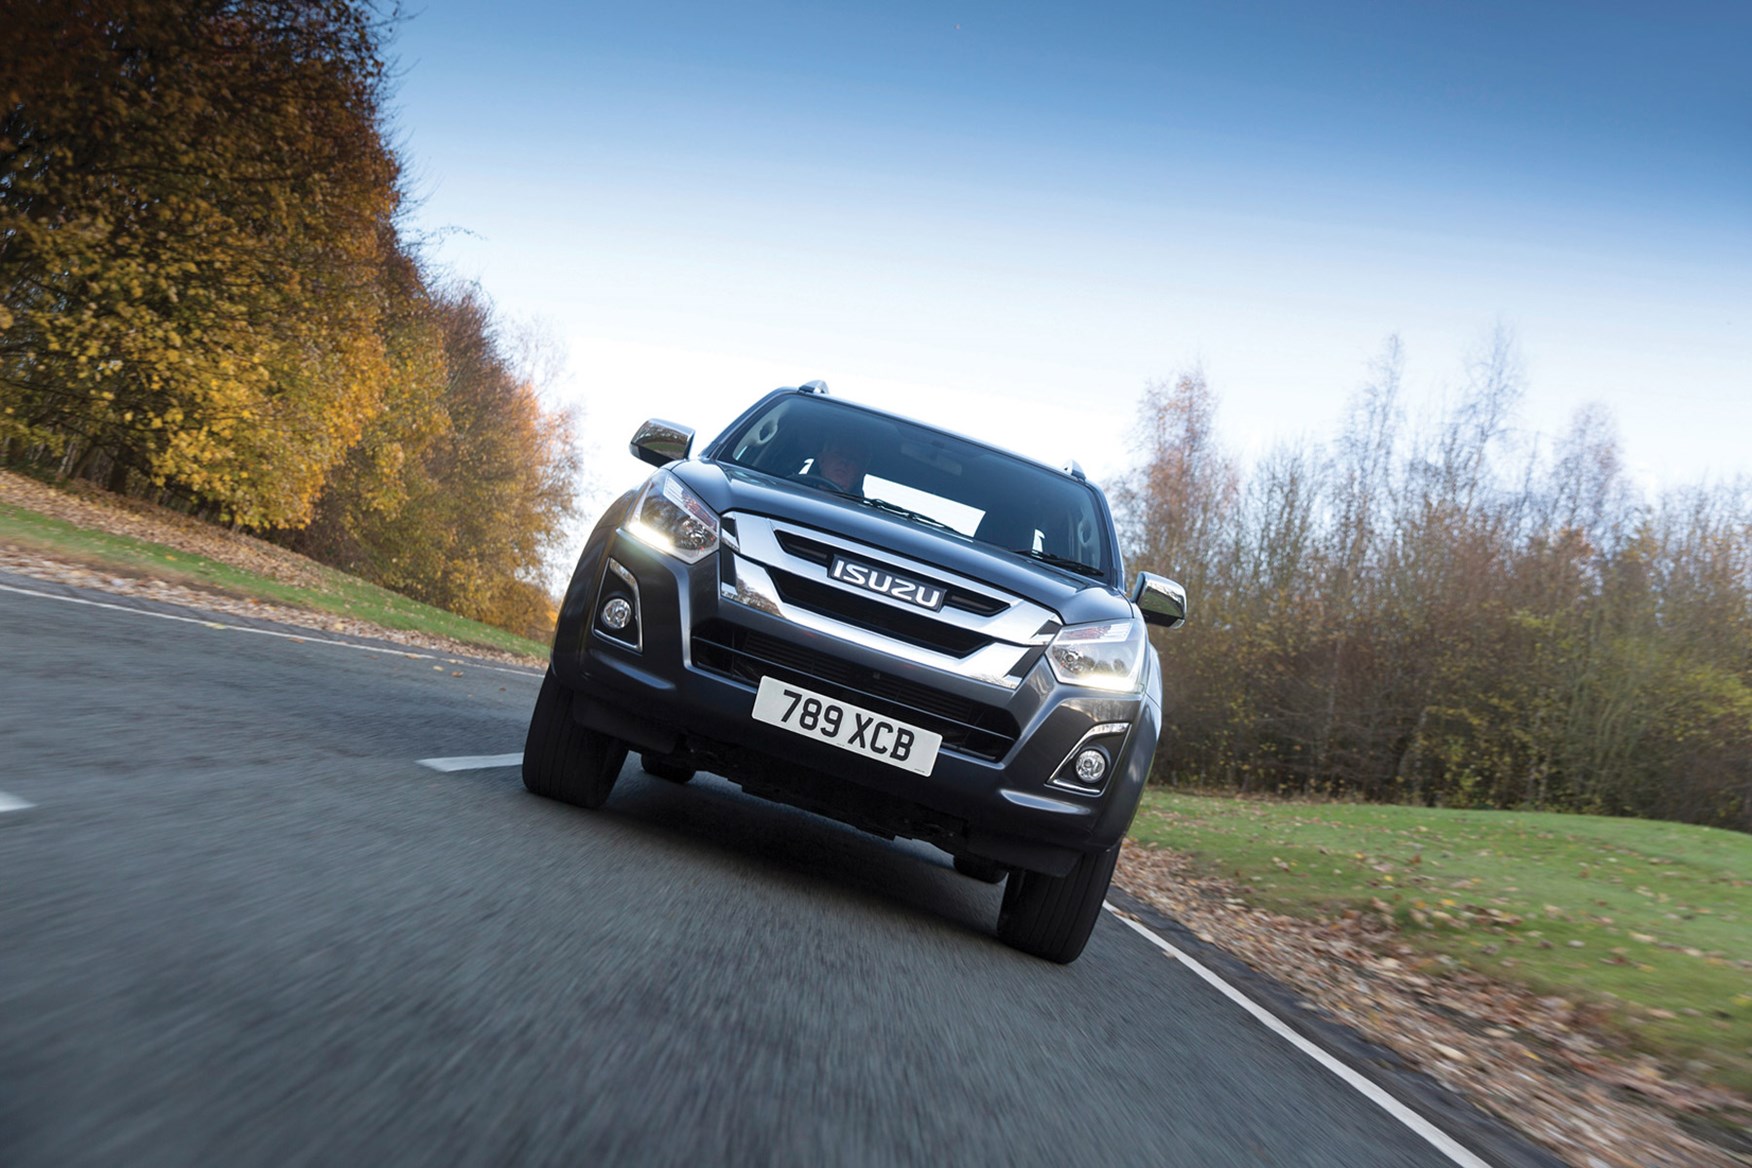 Isuzu D-Max full review on Parkers Vans - front